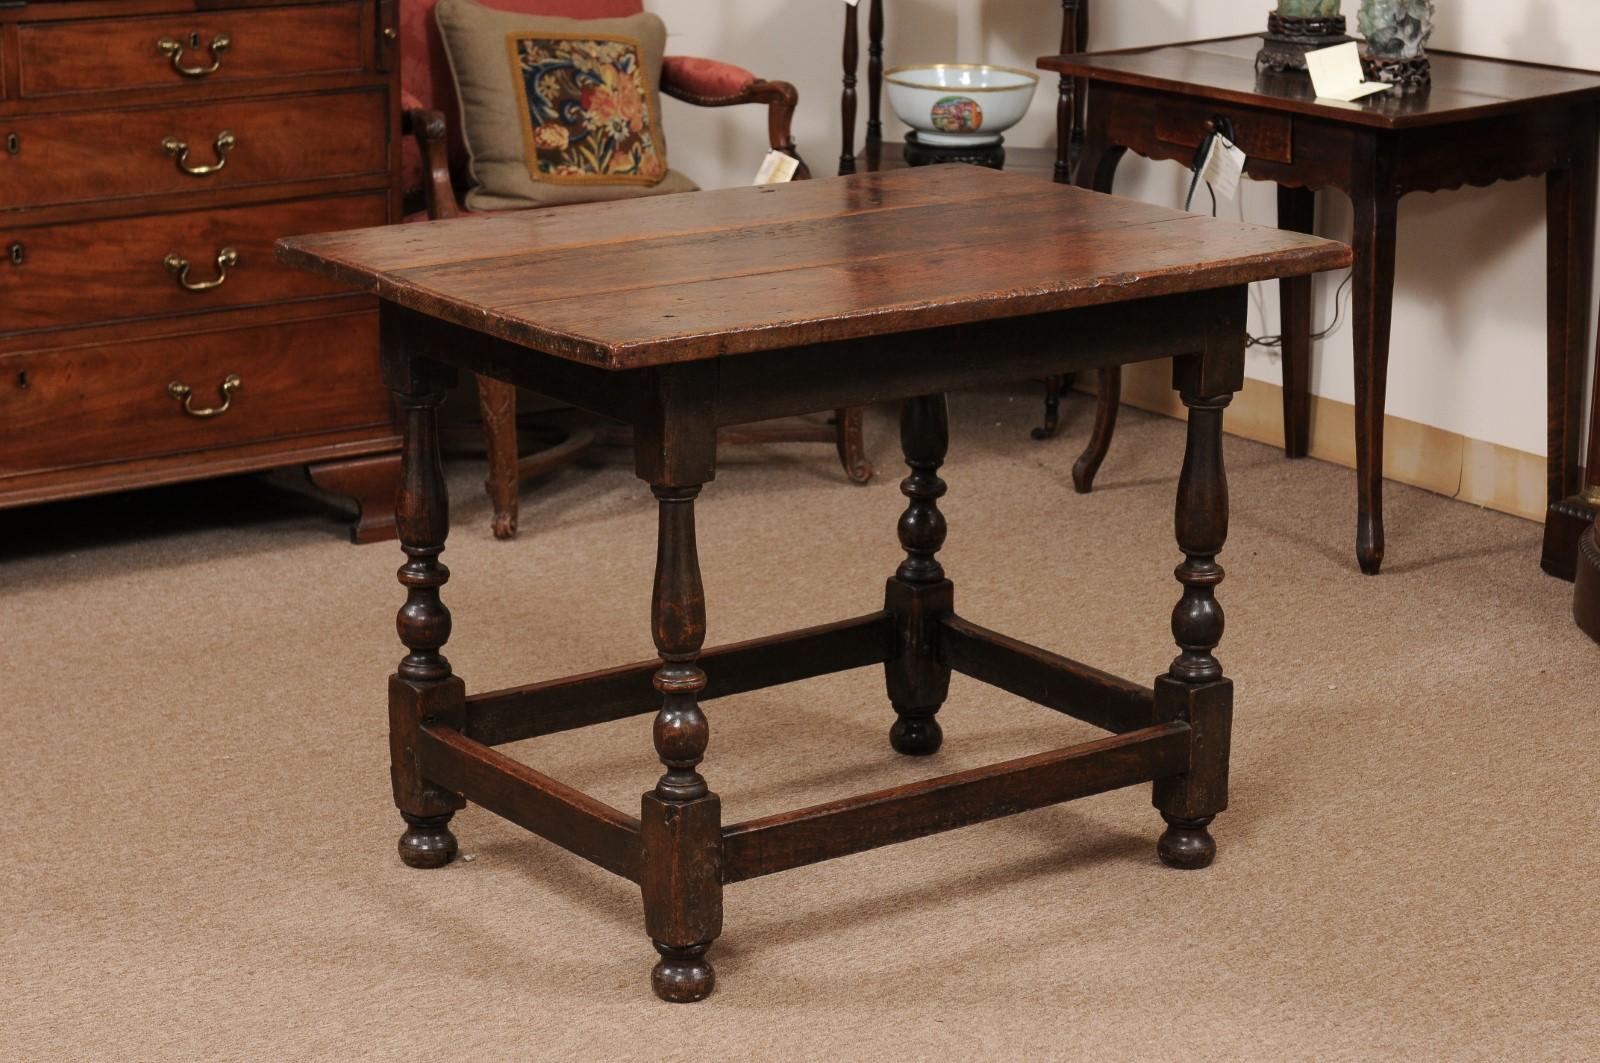 18th Century English William & Mary Oak Tavern Table with Turned Legs For Sale 7